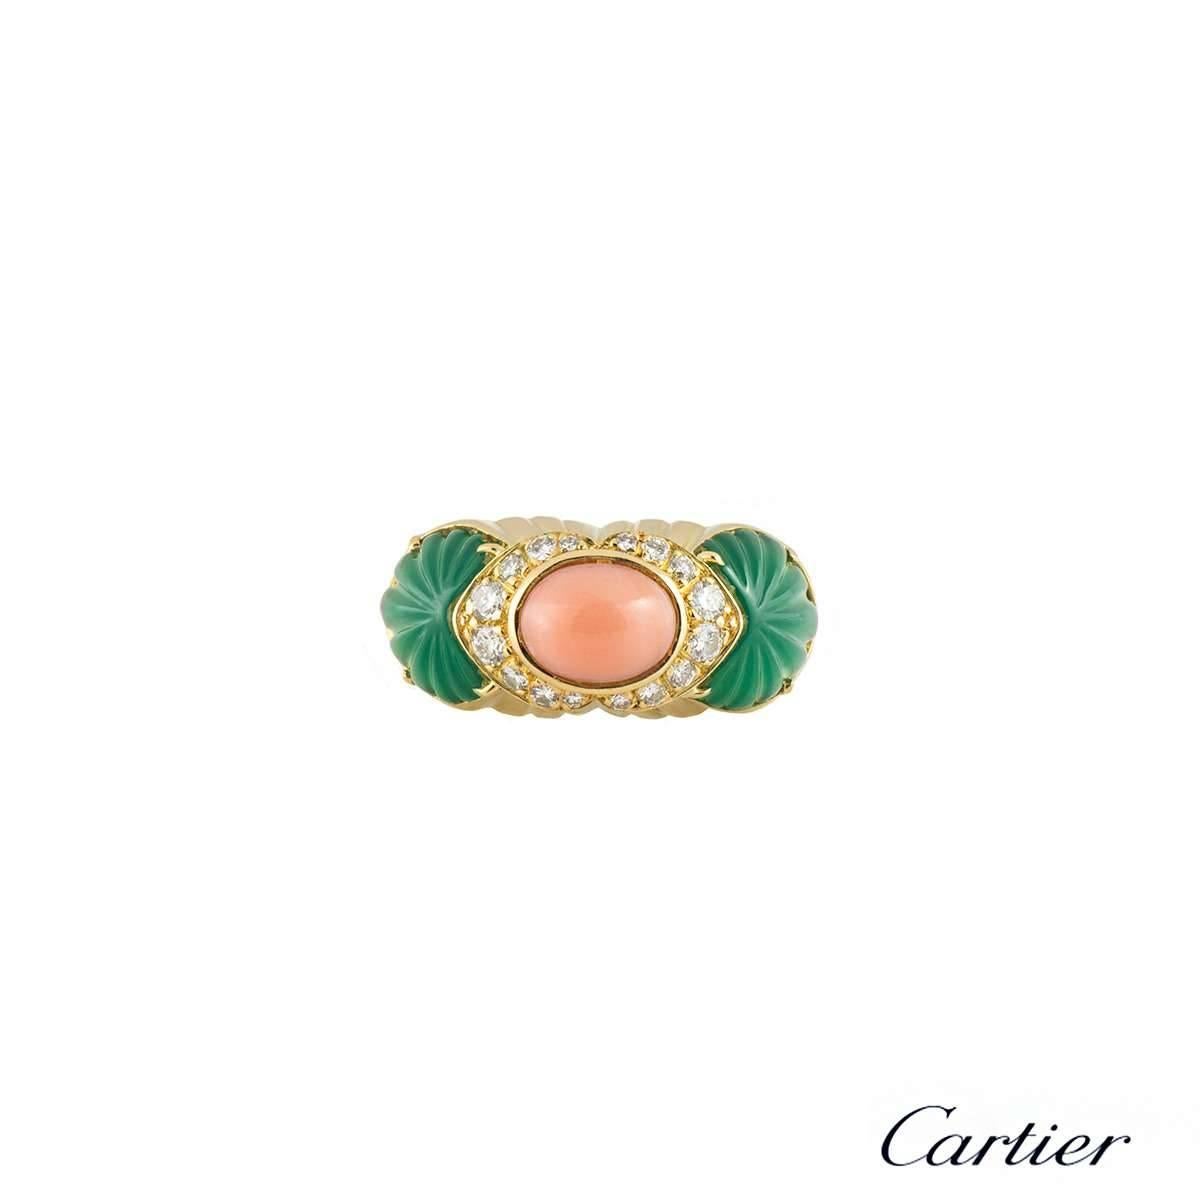 An 18k yellow gold dress ring by Cartier. The ring is set to the centre with a cabochon cut coral with a surround of 16 round brilliant cut diamonds totalling approximately 0.40ct, G colour and VS clarity. Flanked on either side are 2 carved